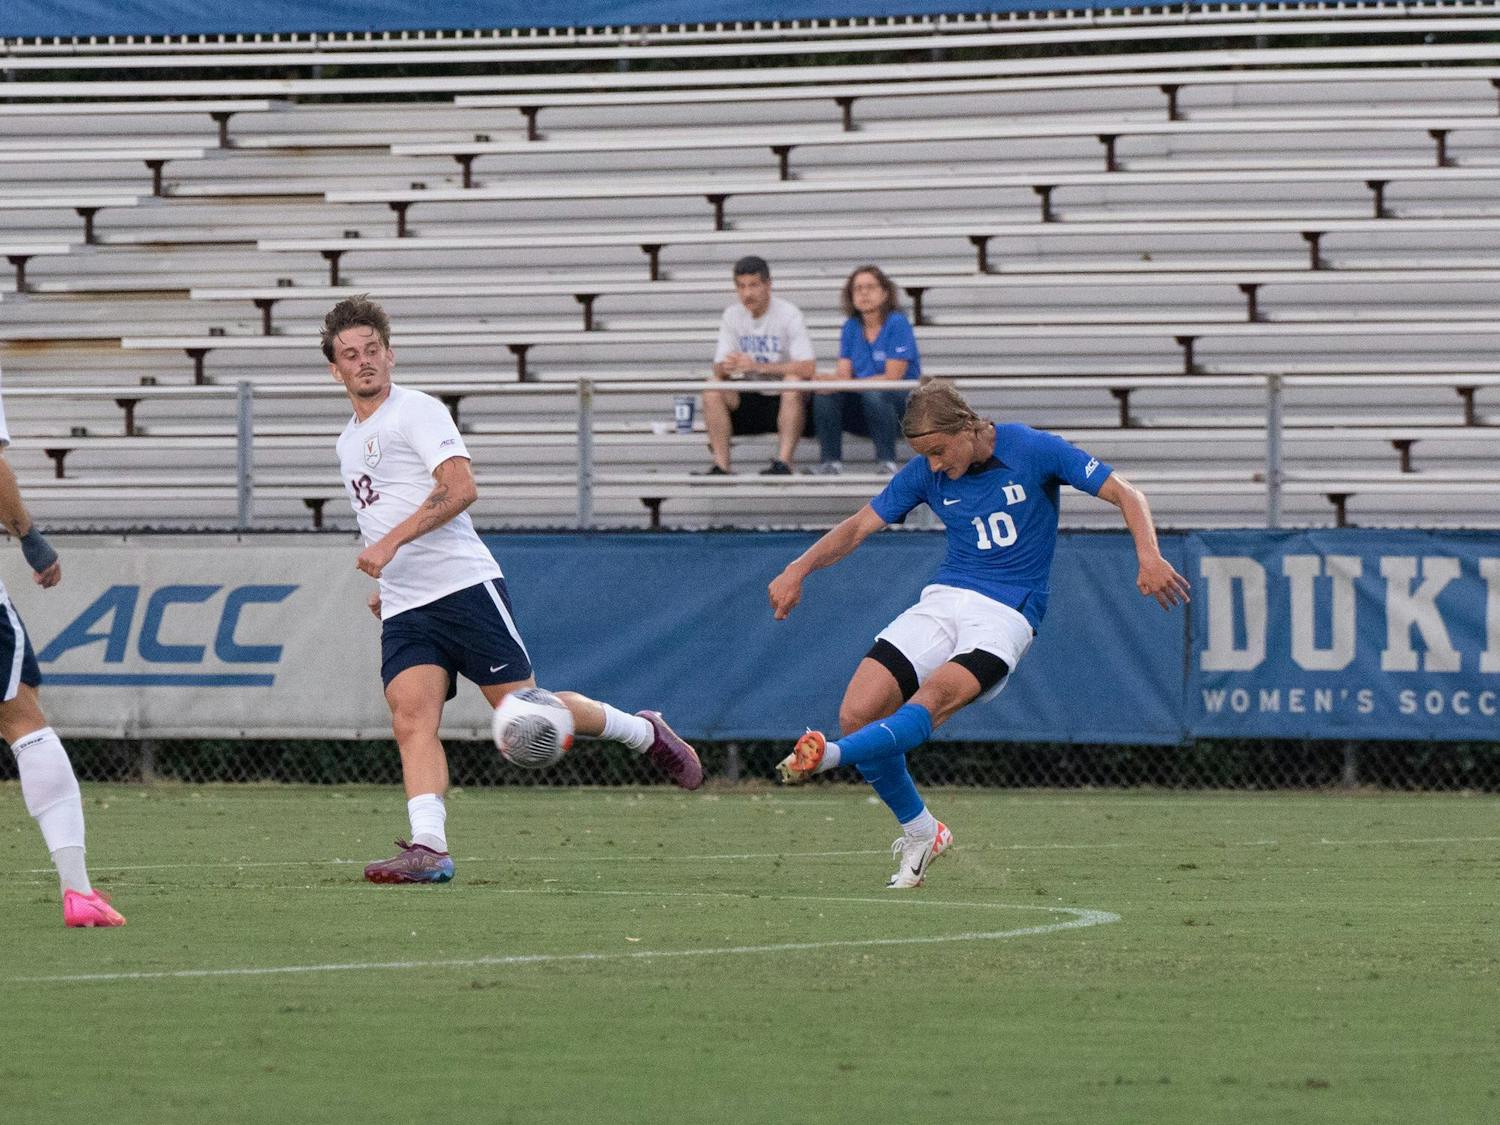 Nick Pariano will be crucial to the men's soccer team's success this season.